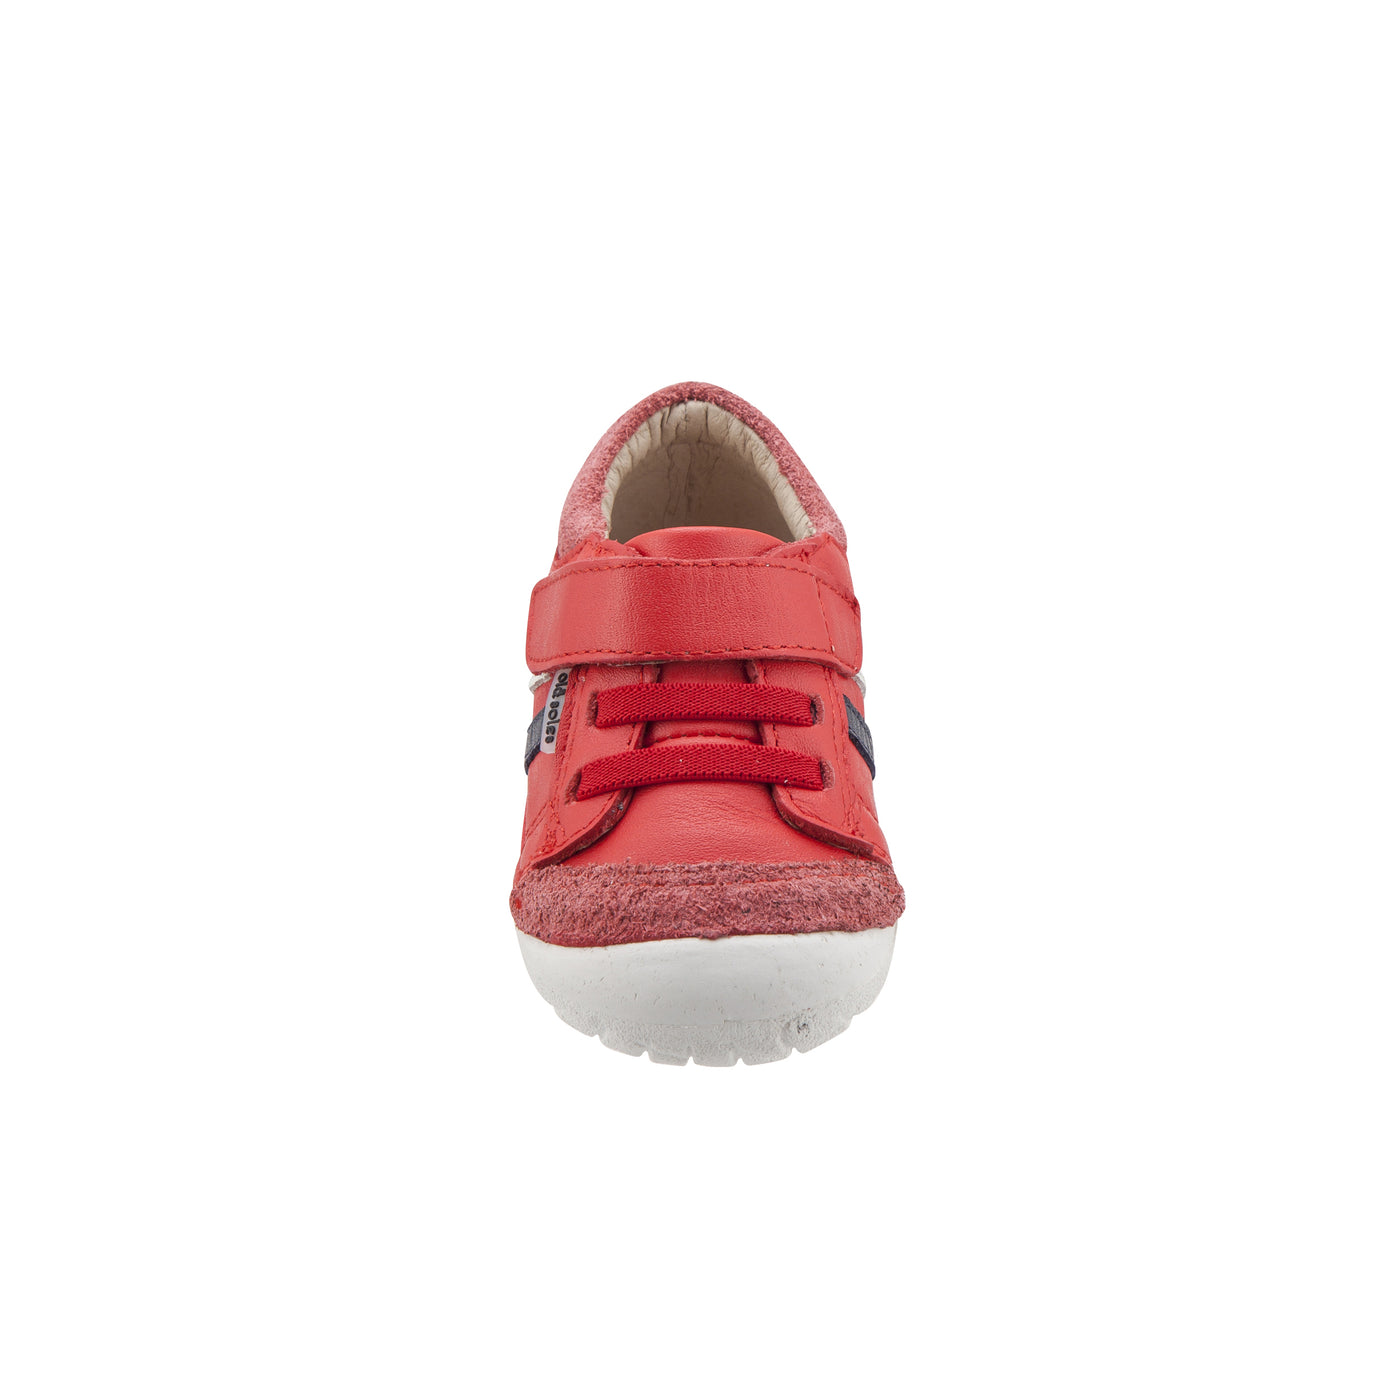 Old Soles Baby 4000 Pave Denzle Sneakers Shoes in Bright Red